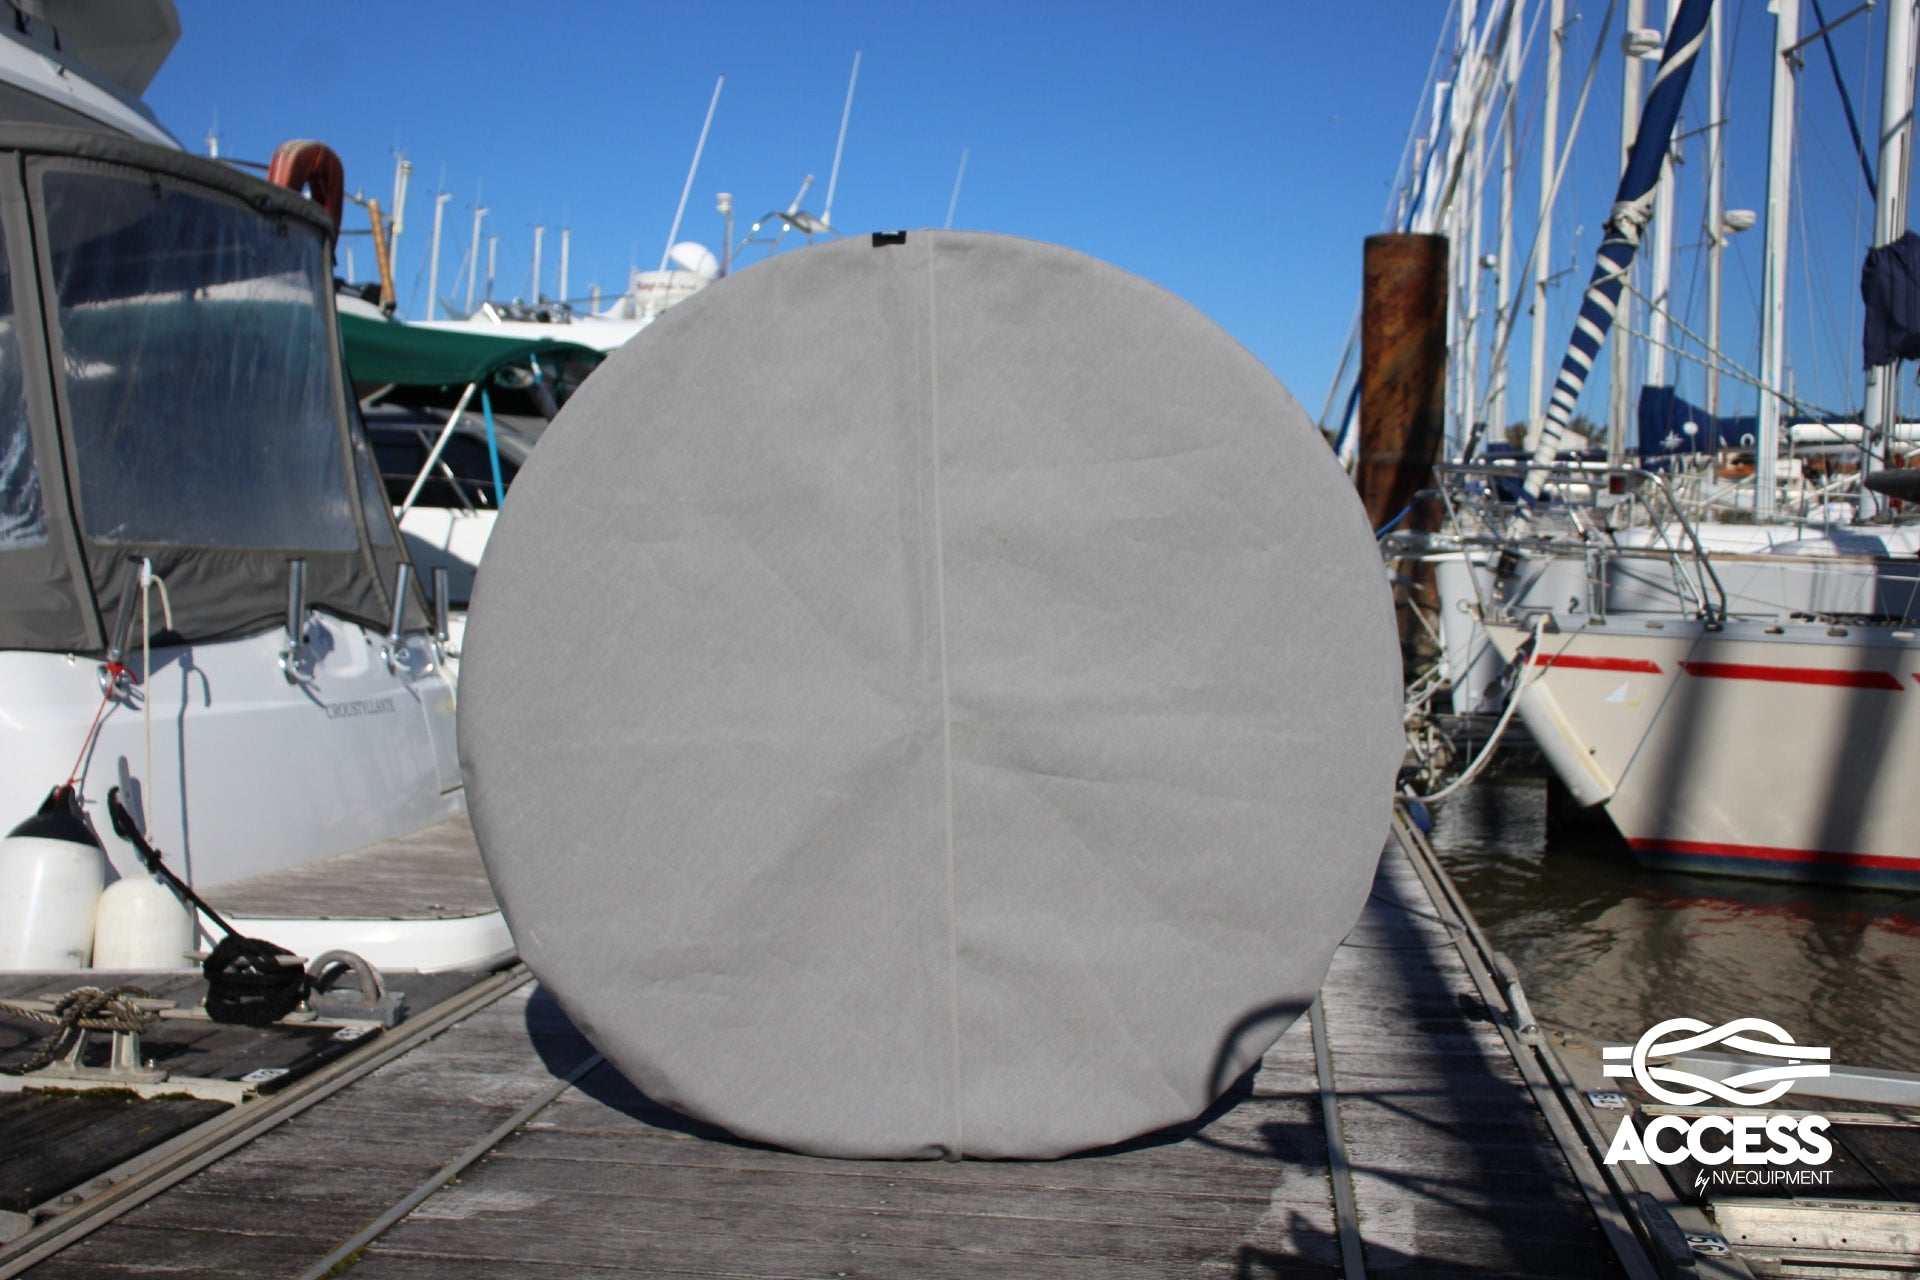 Steering wheel protection for sailboats NV equipment